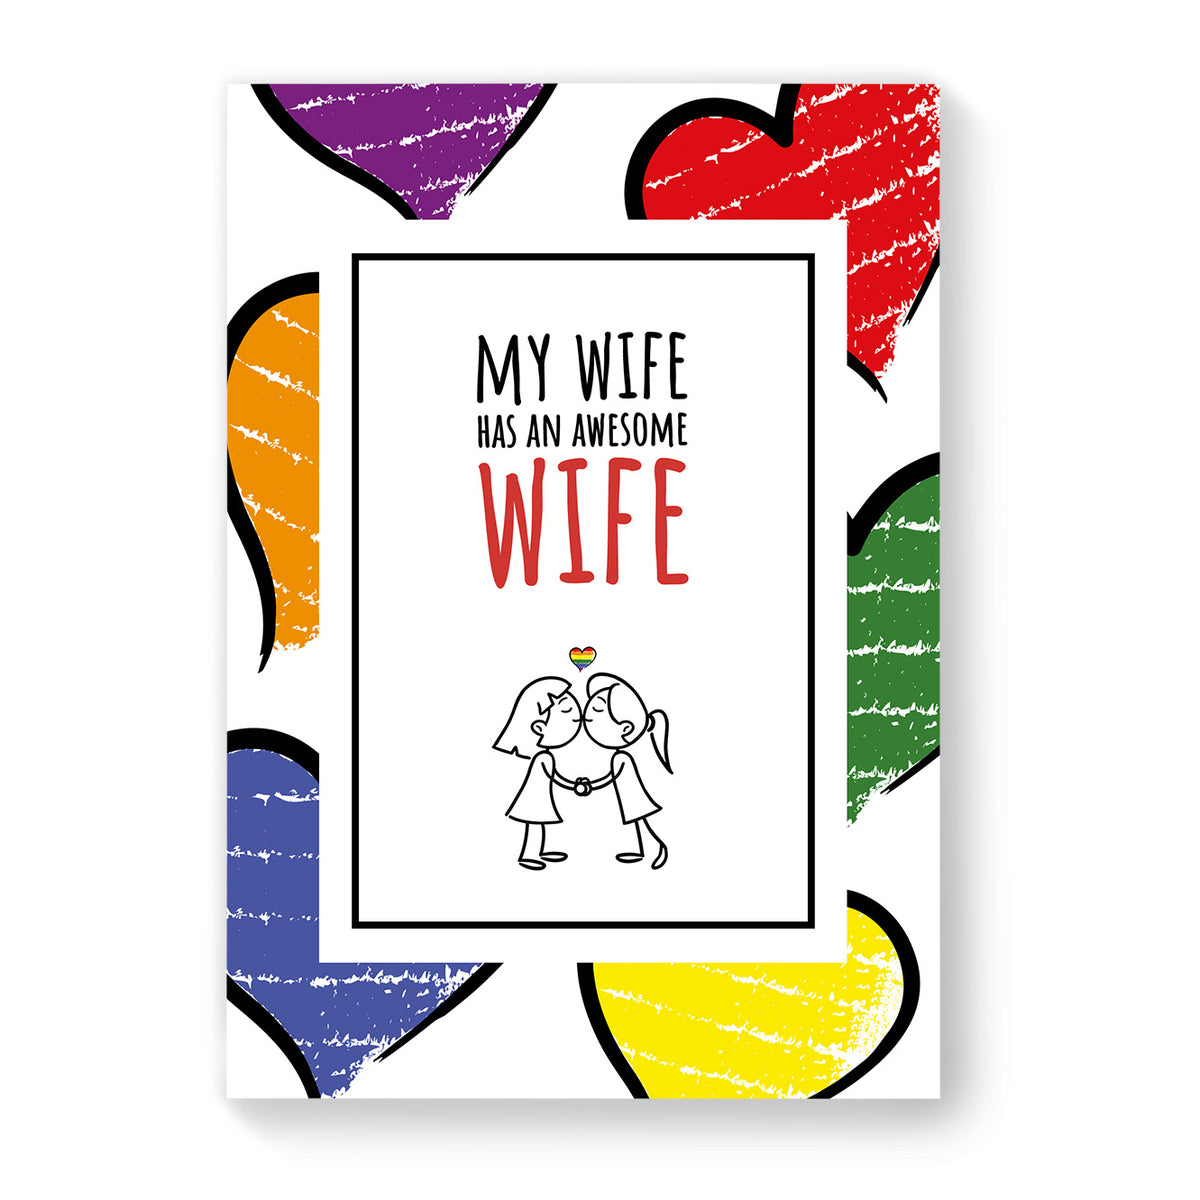 My Wife has an Awesome Wife - Lesbian Gay Couple Card - Large Heart | Gift